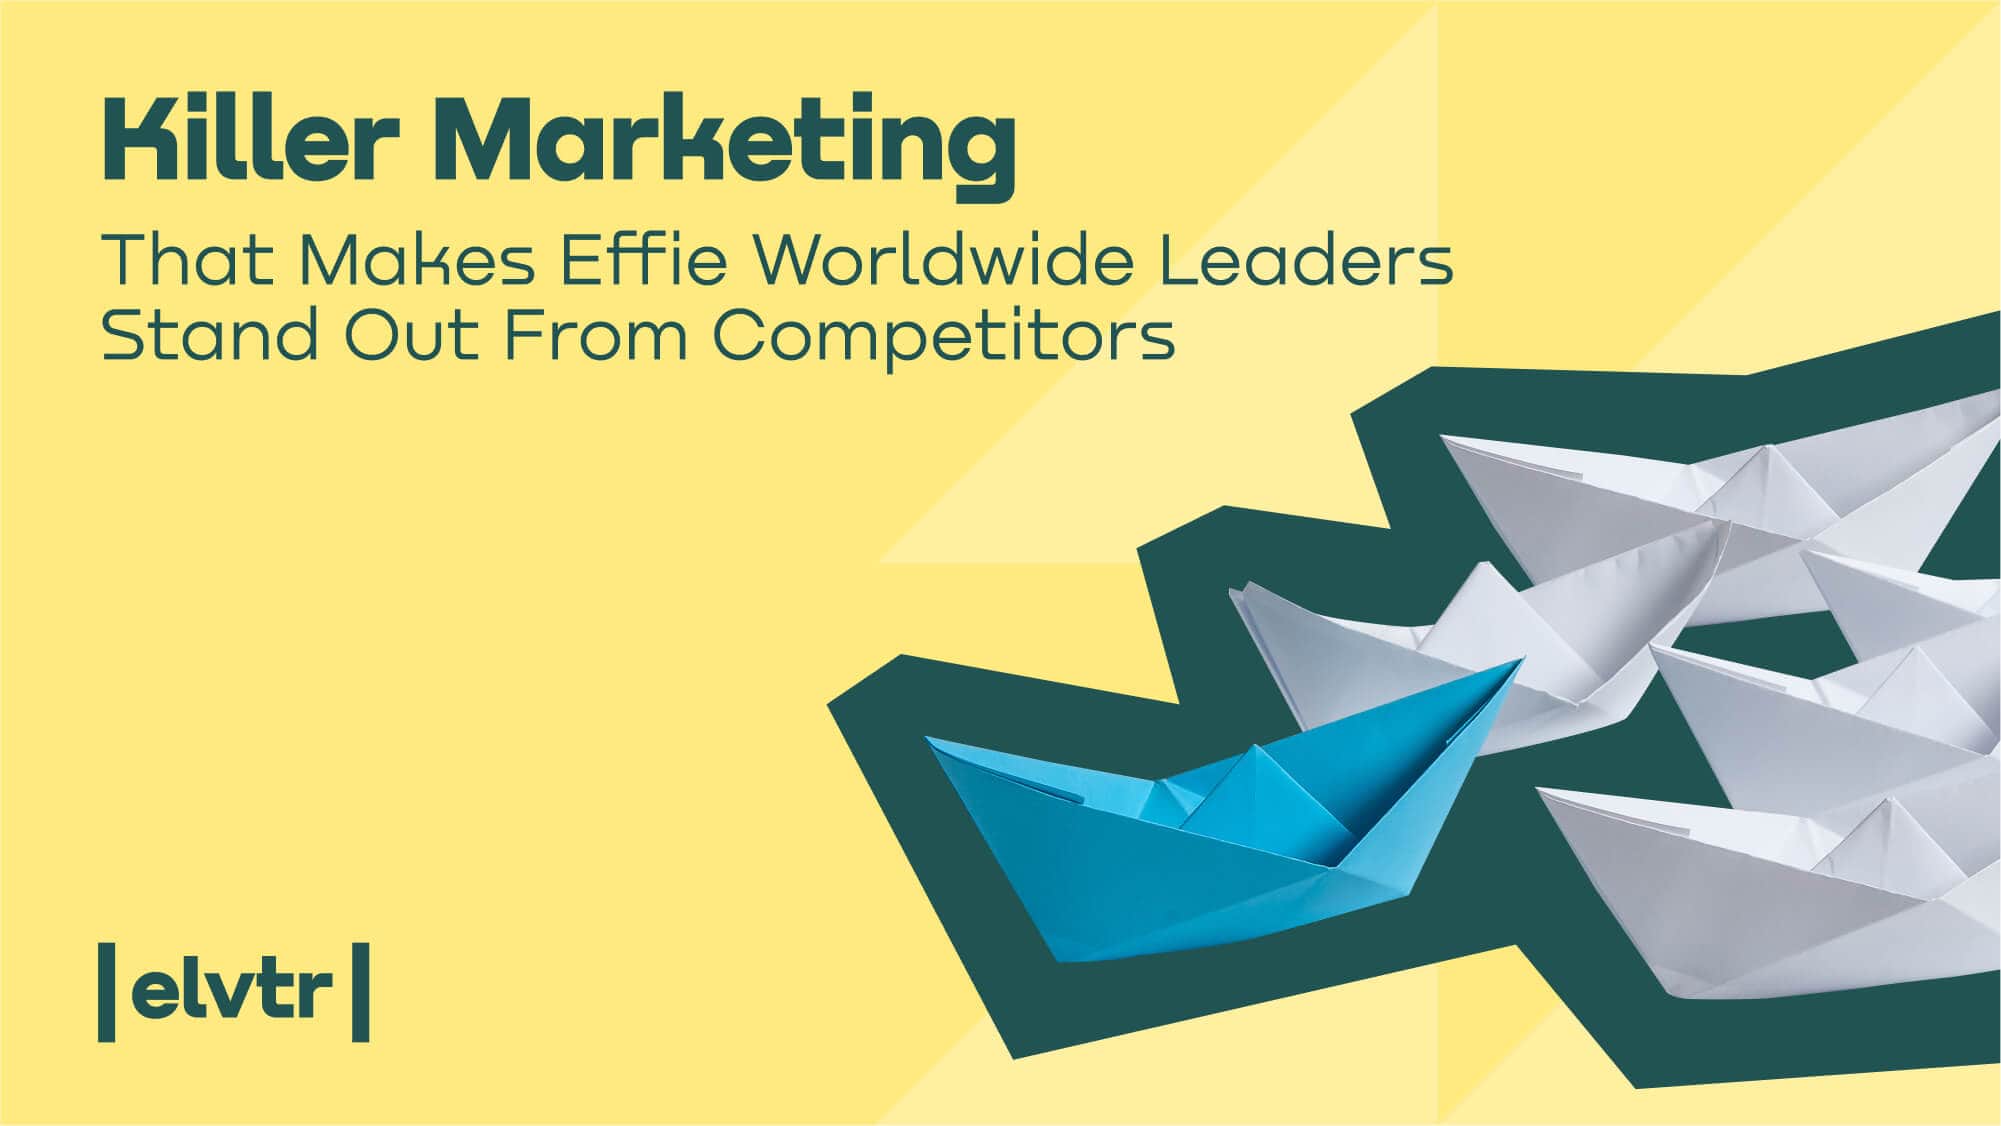 Killer Marketing That Makes Effie Worldwide Leaders Stand Out From Competitors image